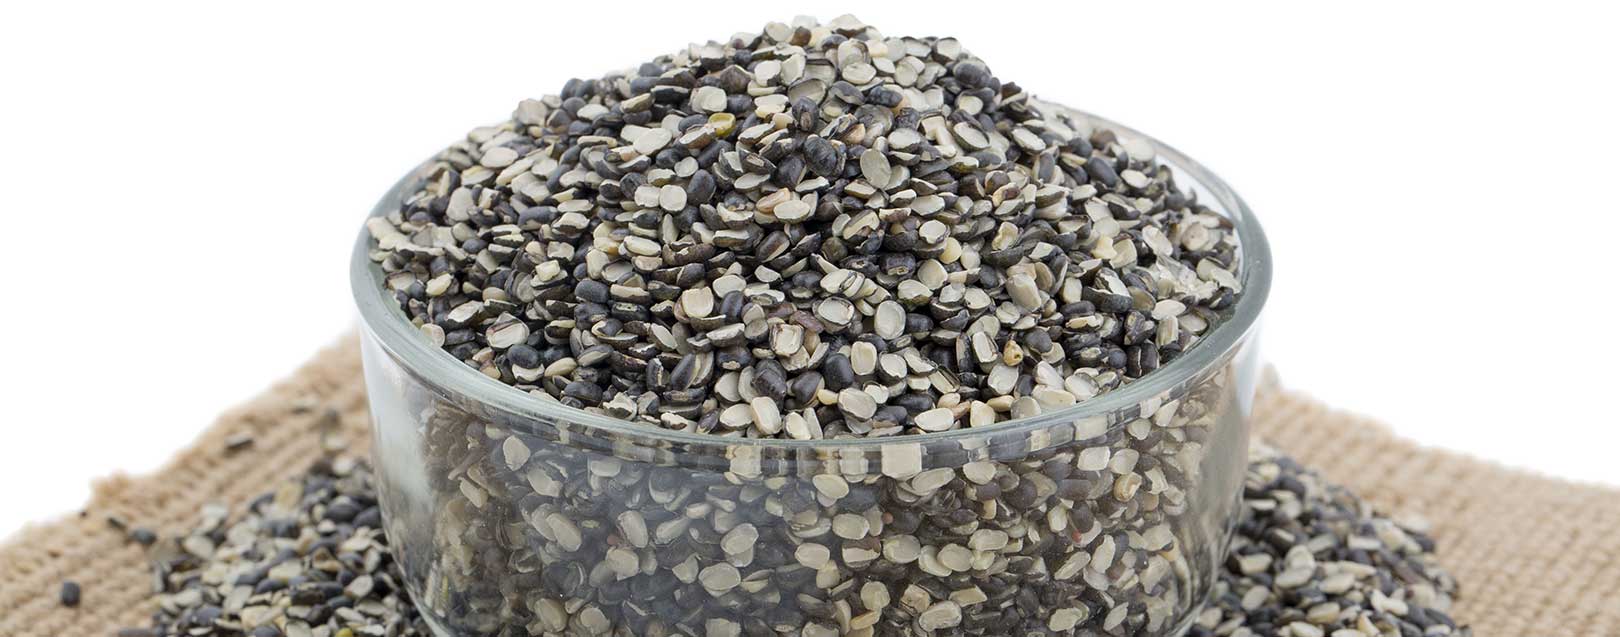 Import of urad /moong dal into India now restricted to 3 lakh MT per annum